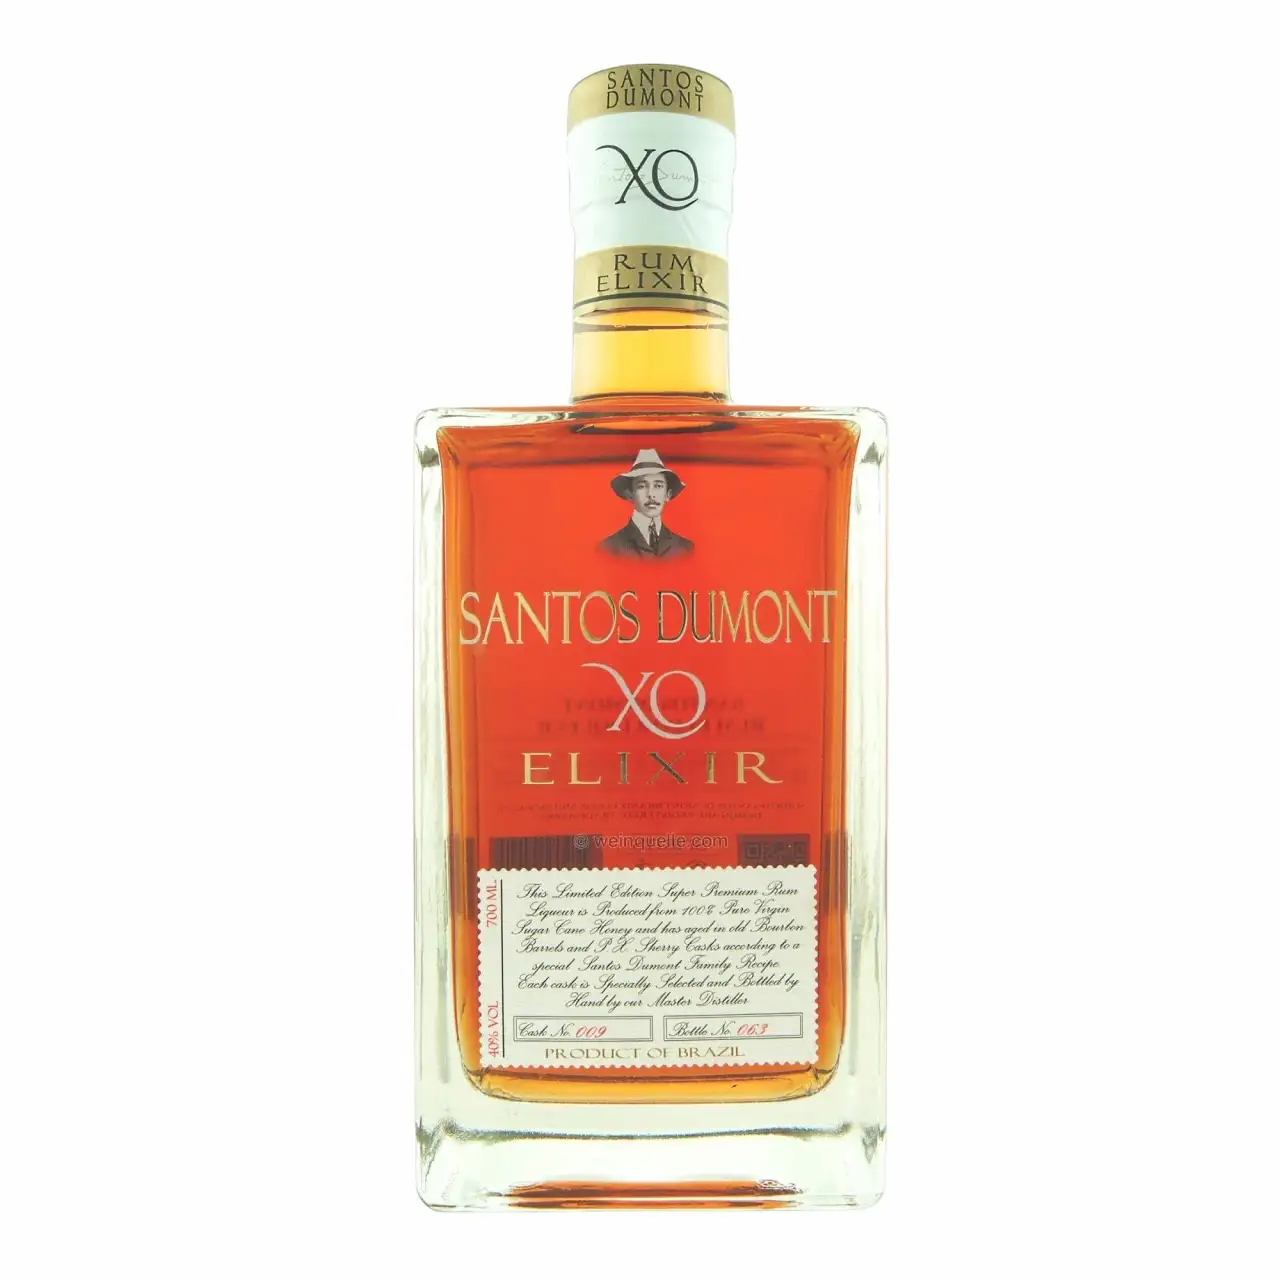 Image of the front of the bottle of the rum Santos Dumont XO Elixir